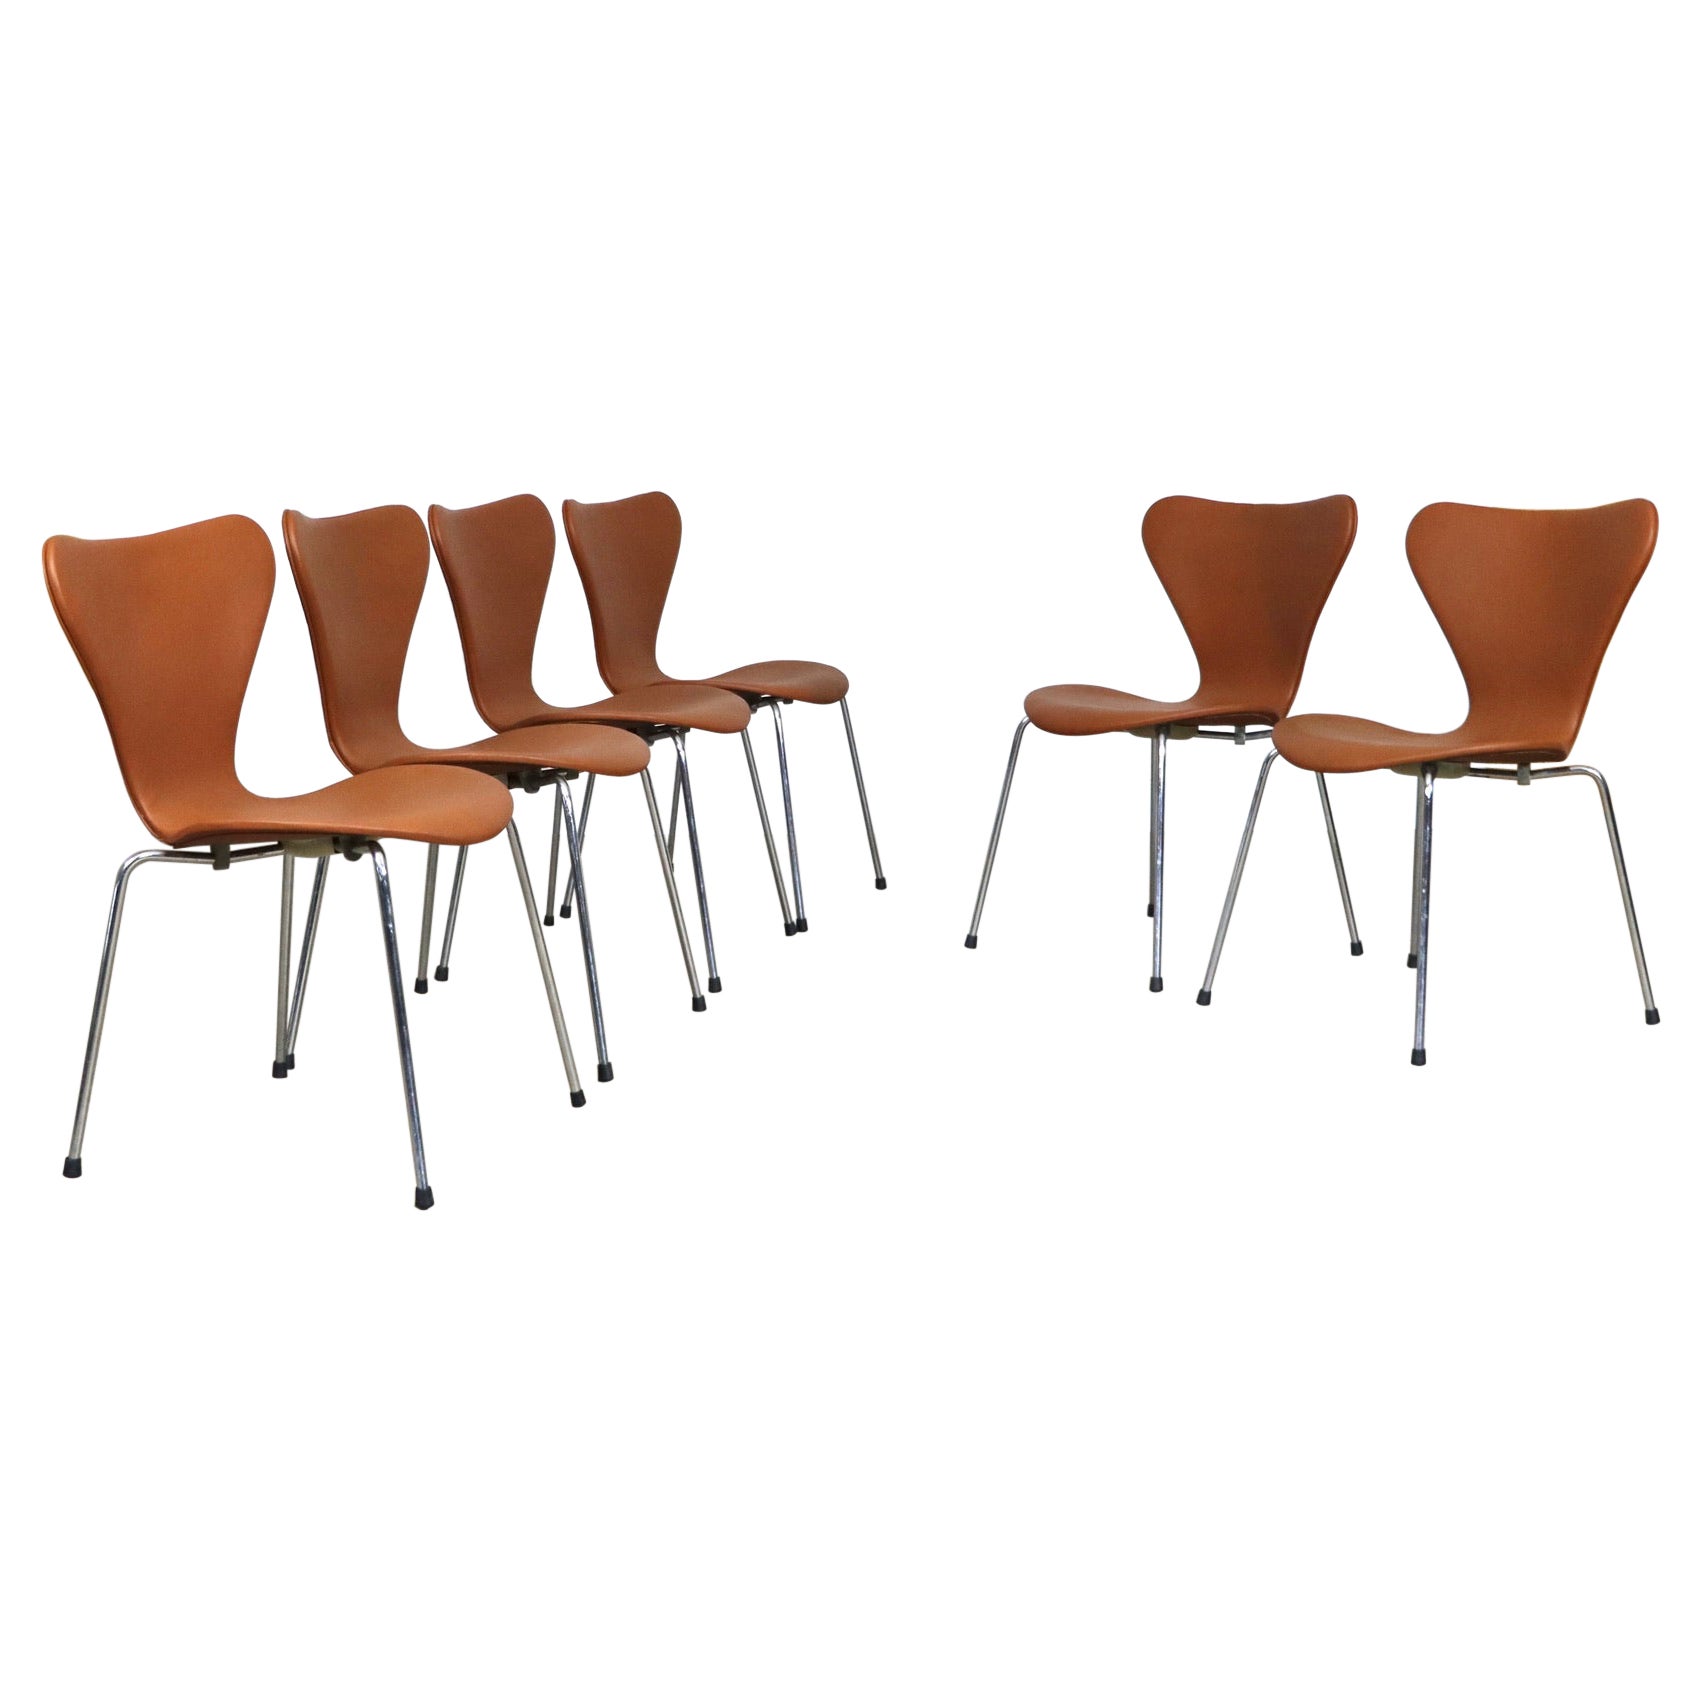 Set of 6 Butterfly Chairs in Cognac Leather by Arne Jacobsen for Fritz Hansen For Sale